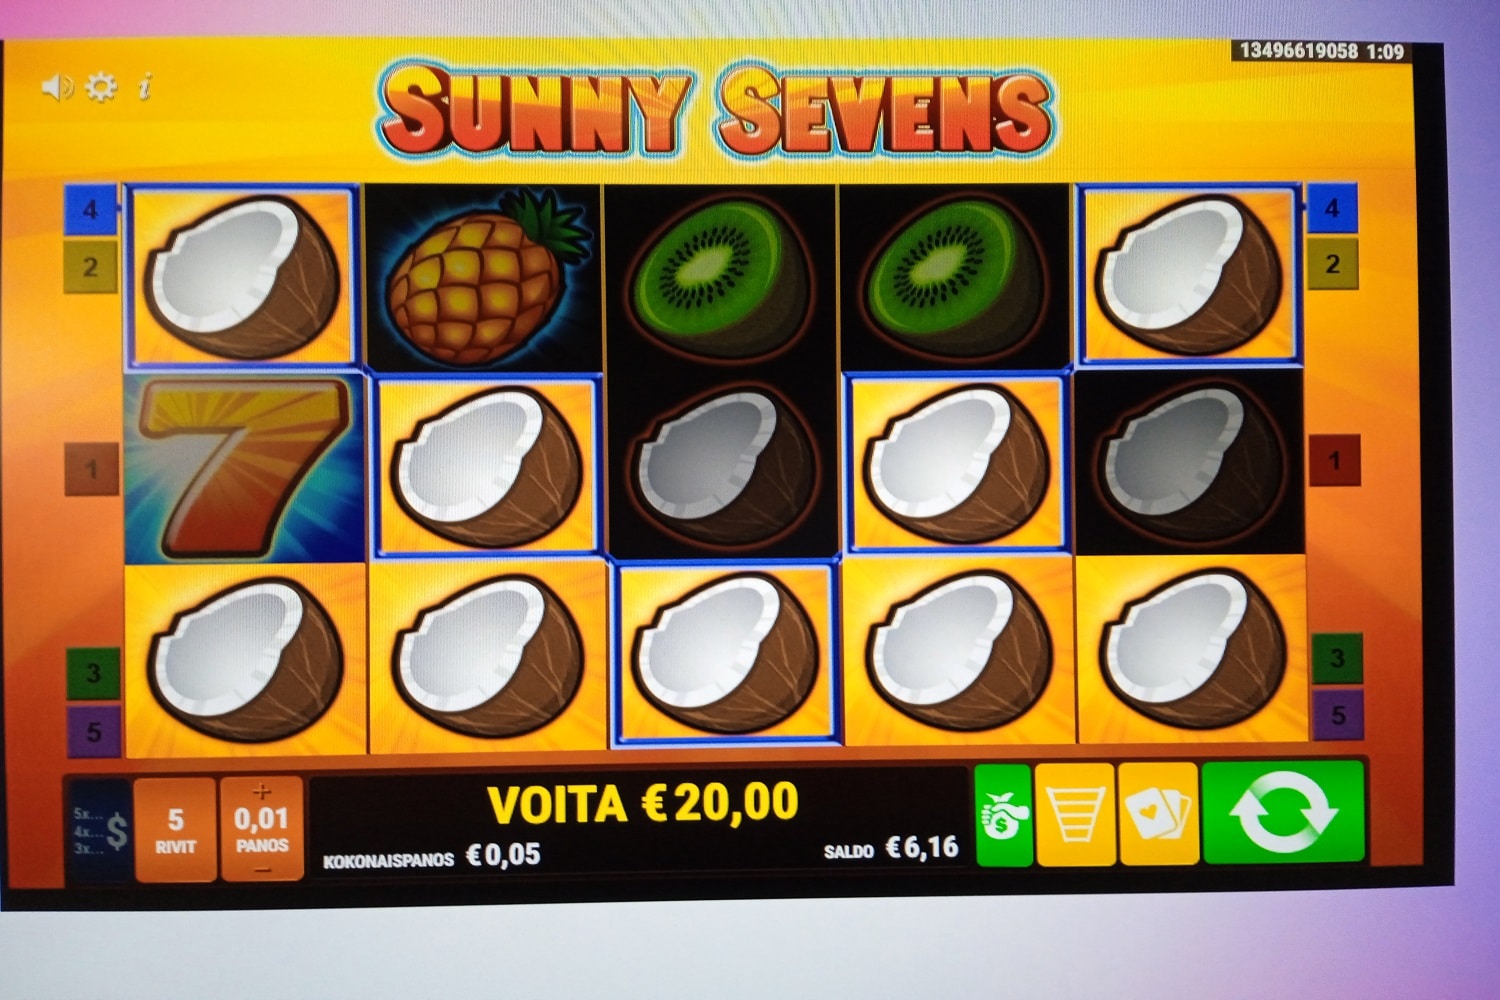 Sunny Sevens Casino win picture by Houdinos 20.00€ 400x 29.11.2022